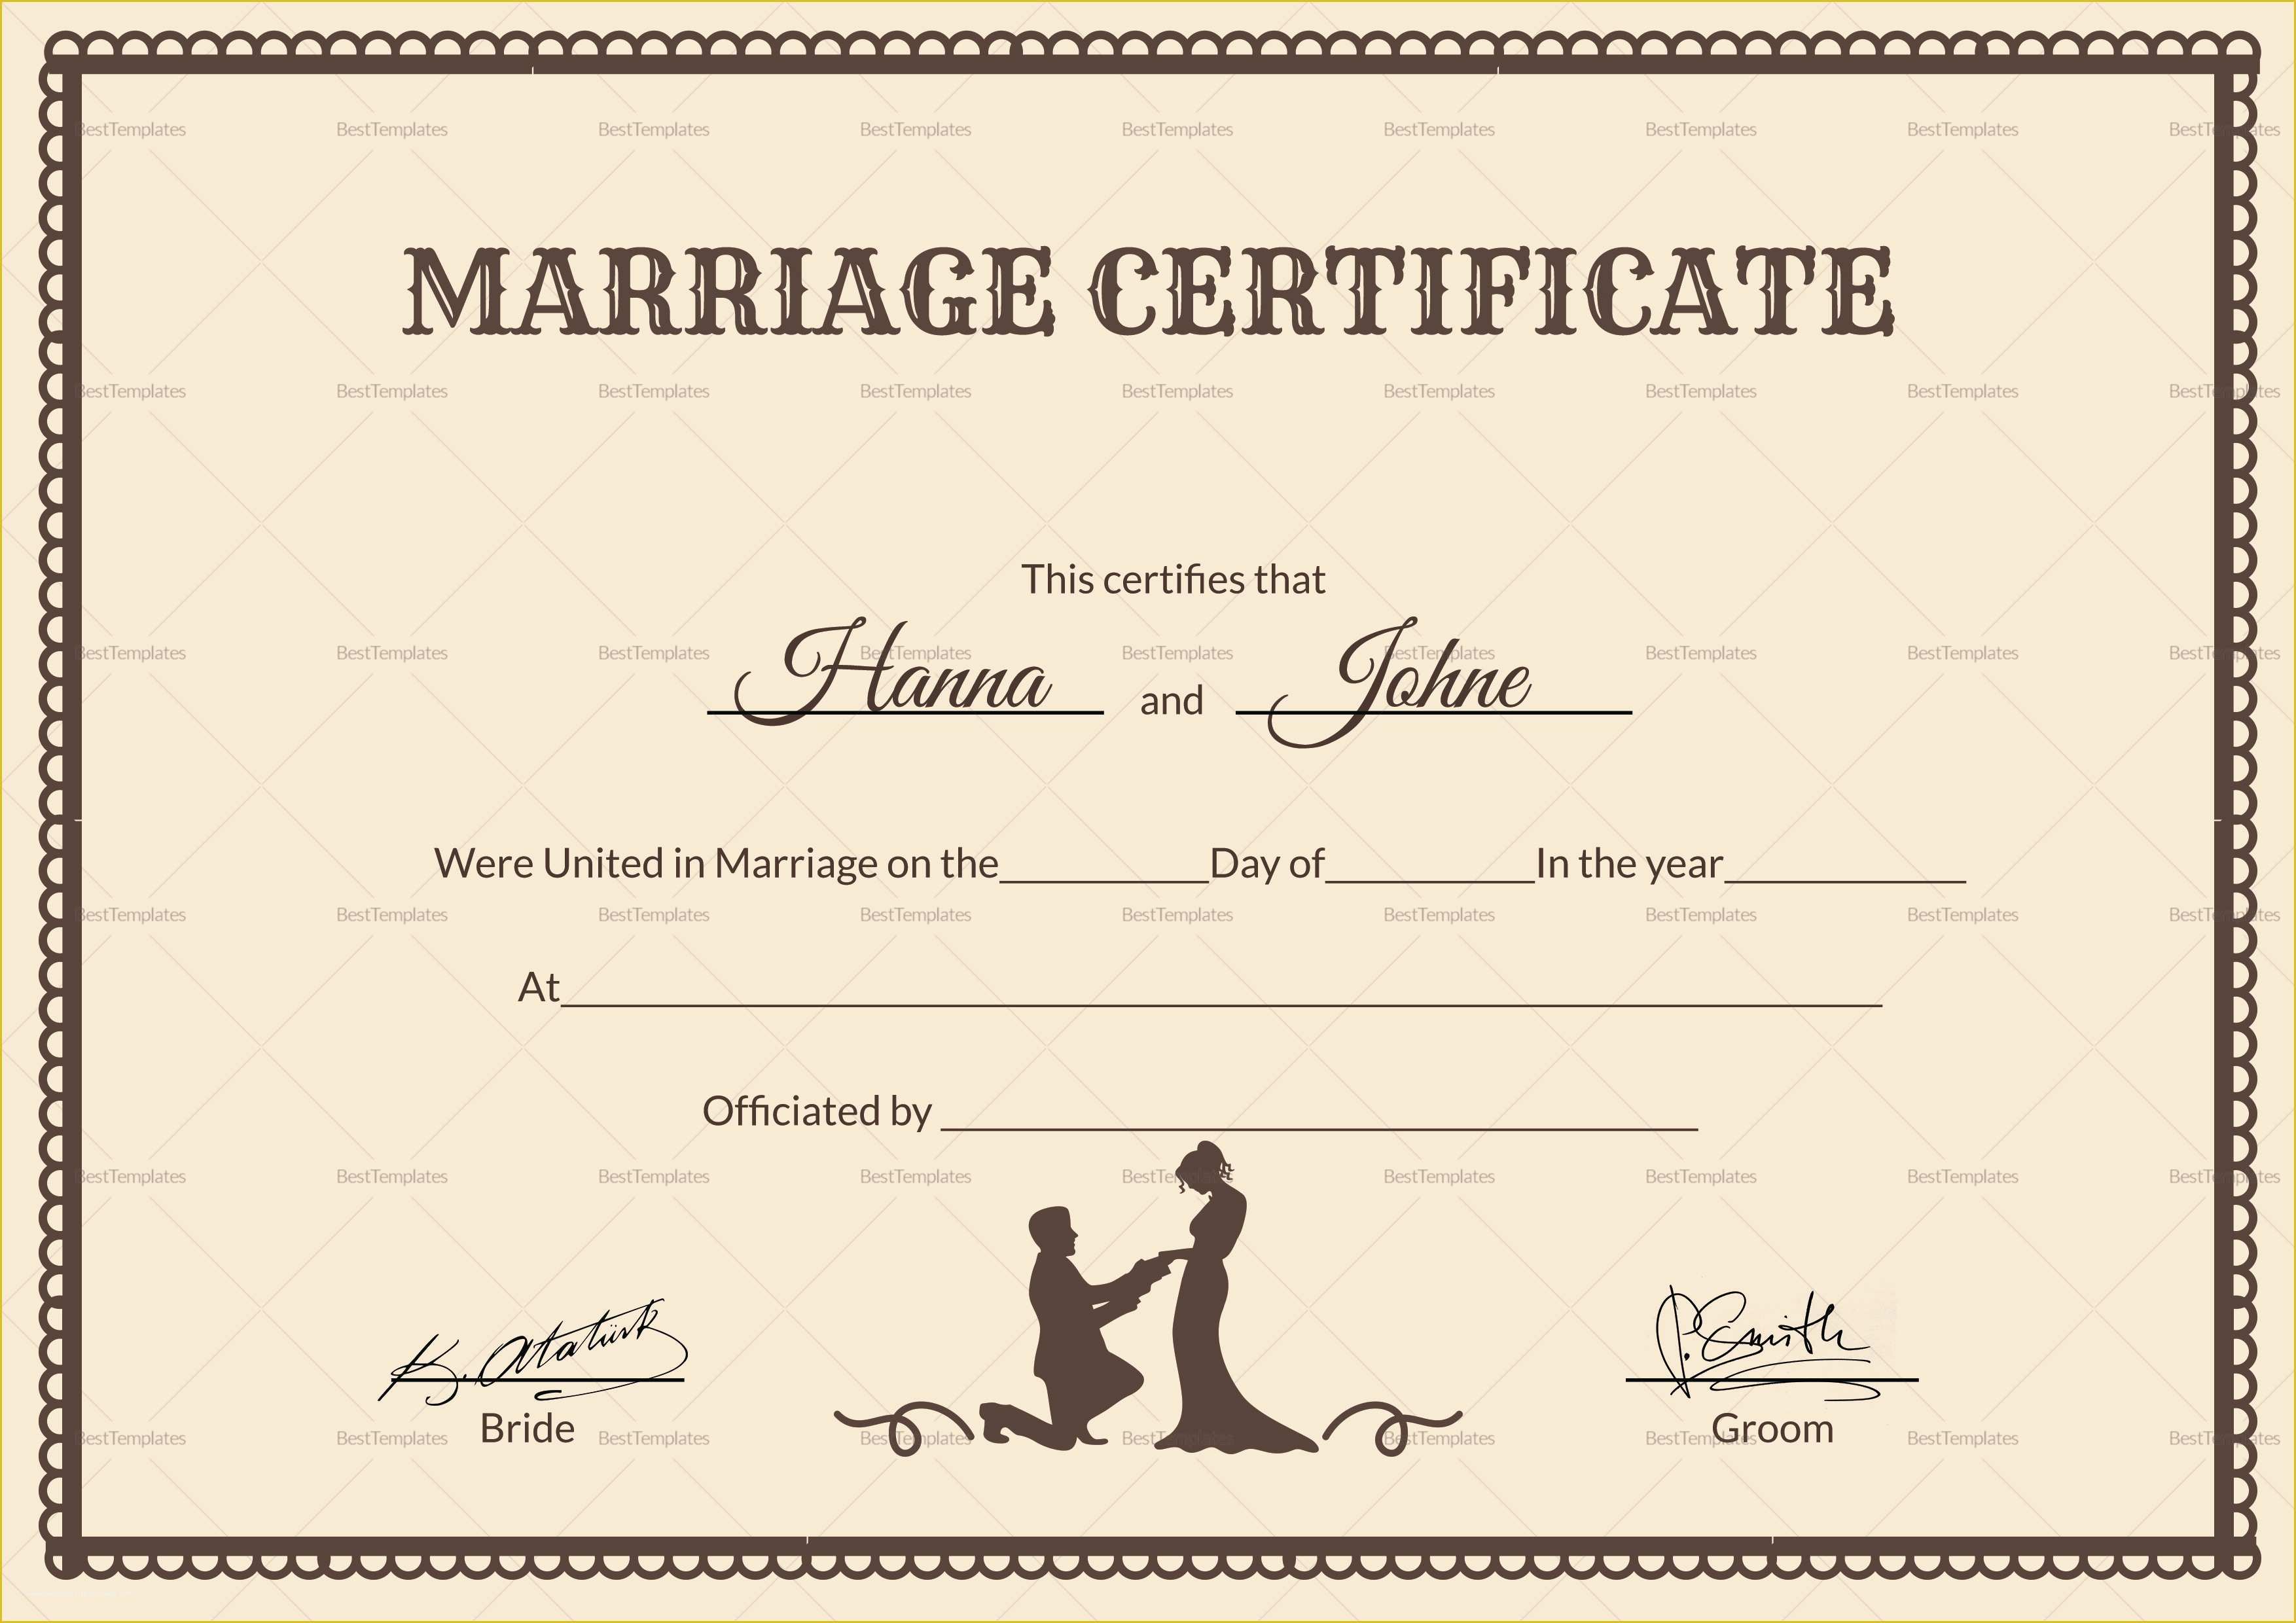 Free Marriage Certificate Template Word Of islamic Marriage Certificate